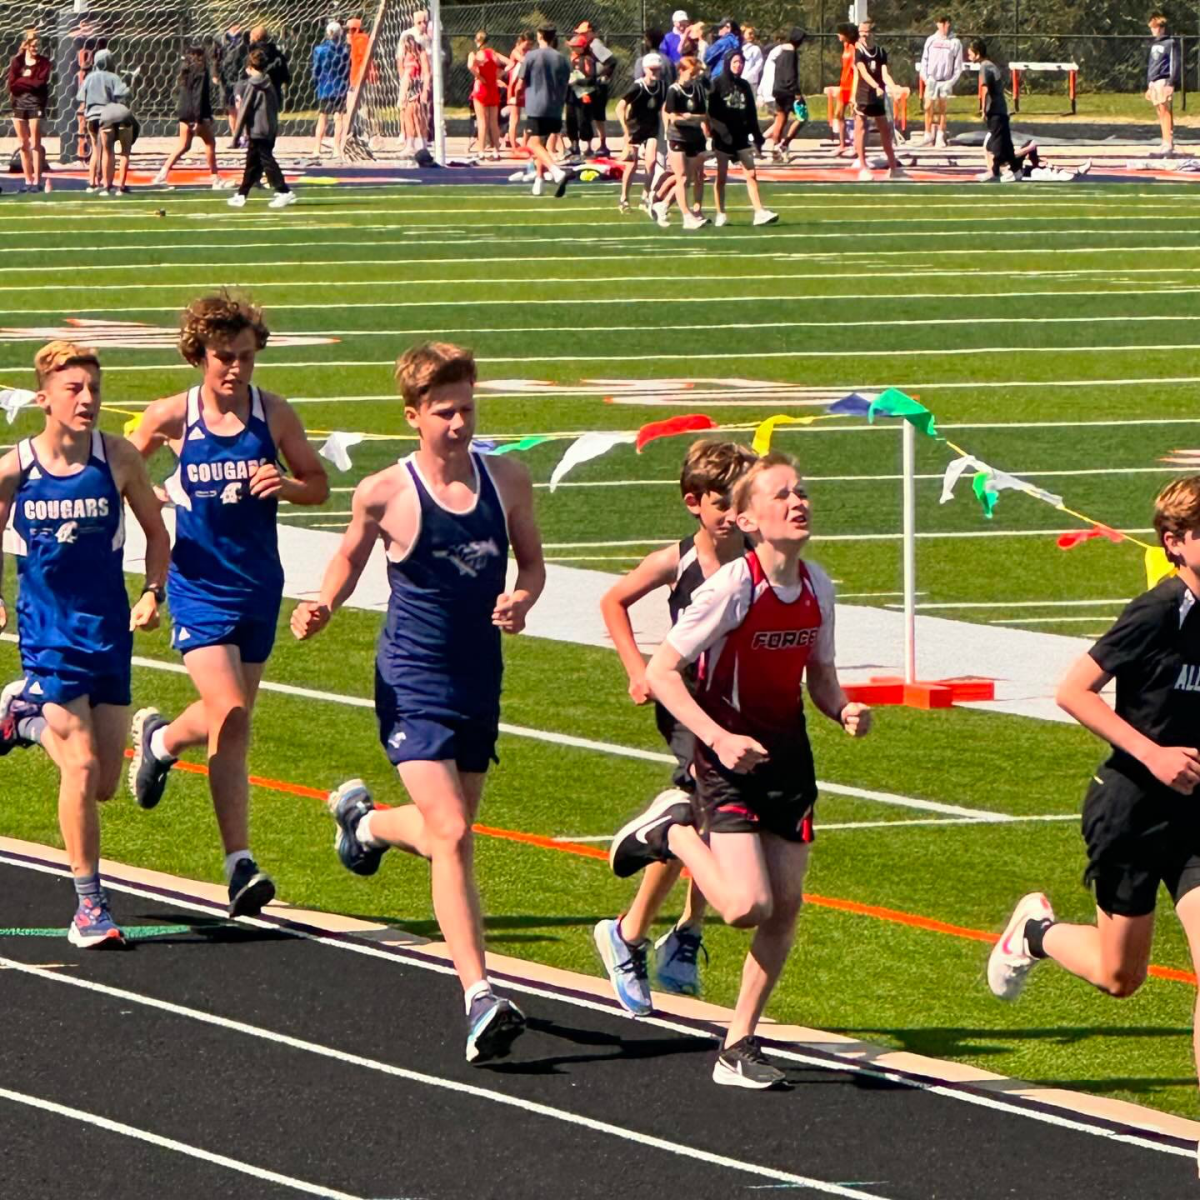 Seventh grader Camden Holley races towards the finish line.